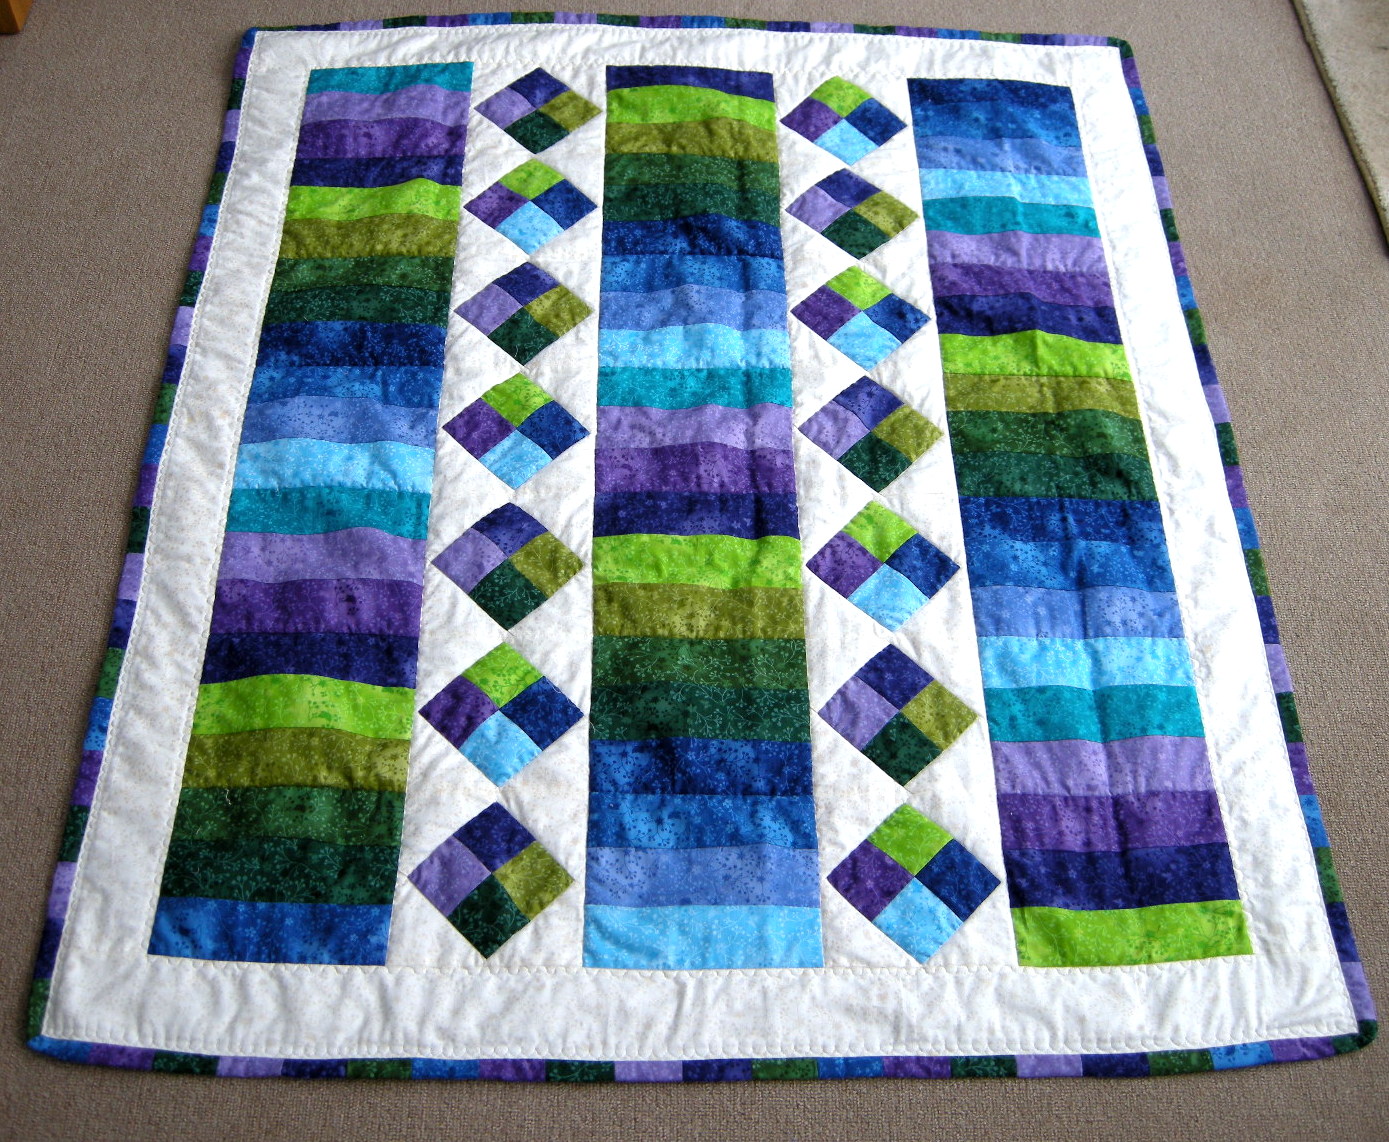 Jelly Roll Quilt Patterns For Beginners Pin On Sewing: Quilts, Blankets ...